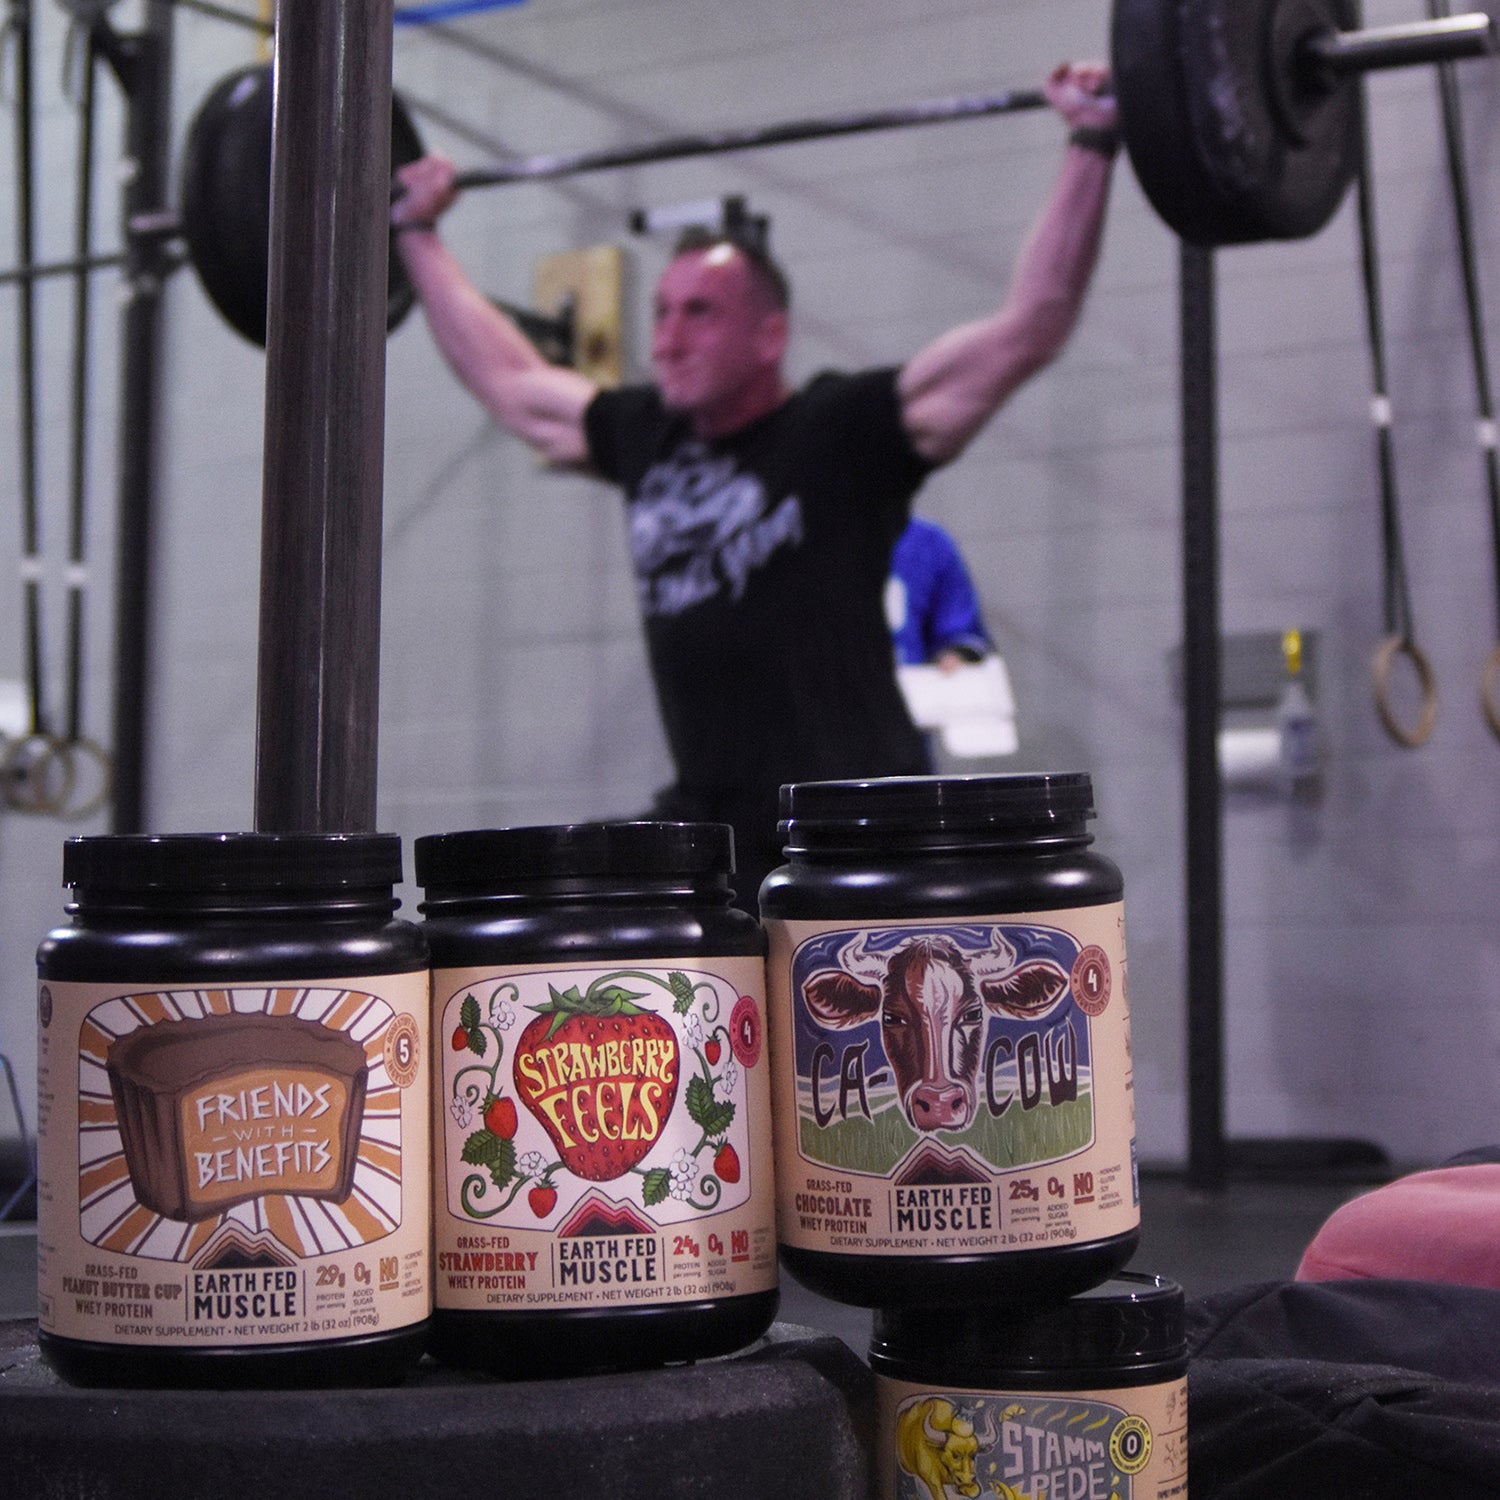 Peanut Butter Cup, Best Tasting Whey Protein Isolate Powder, Truly Grass  Fed, Organic, Gluten Free